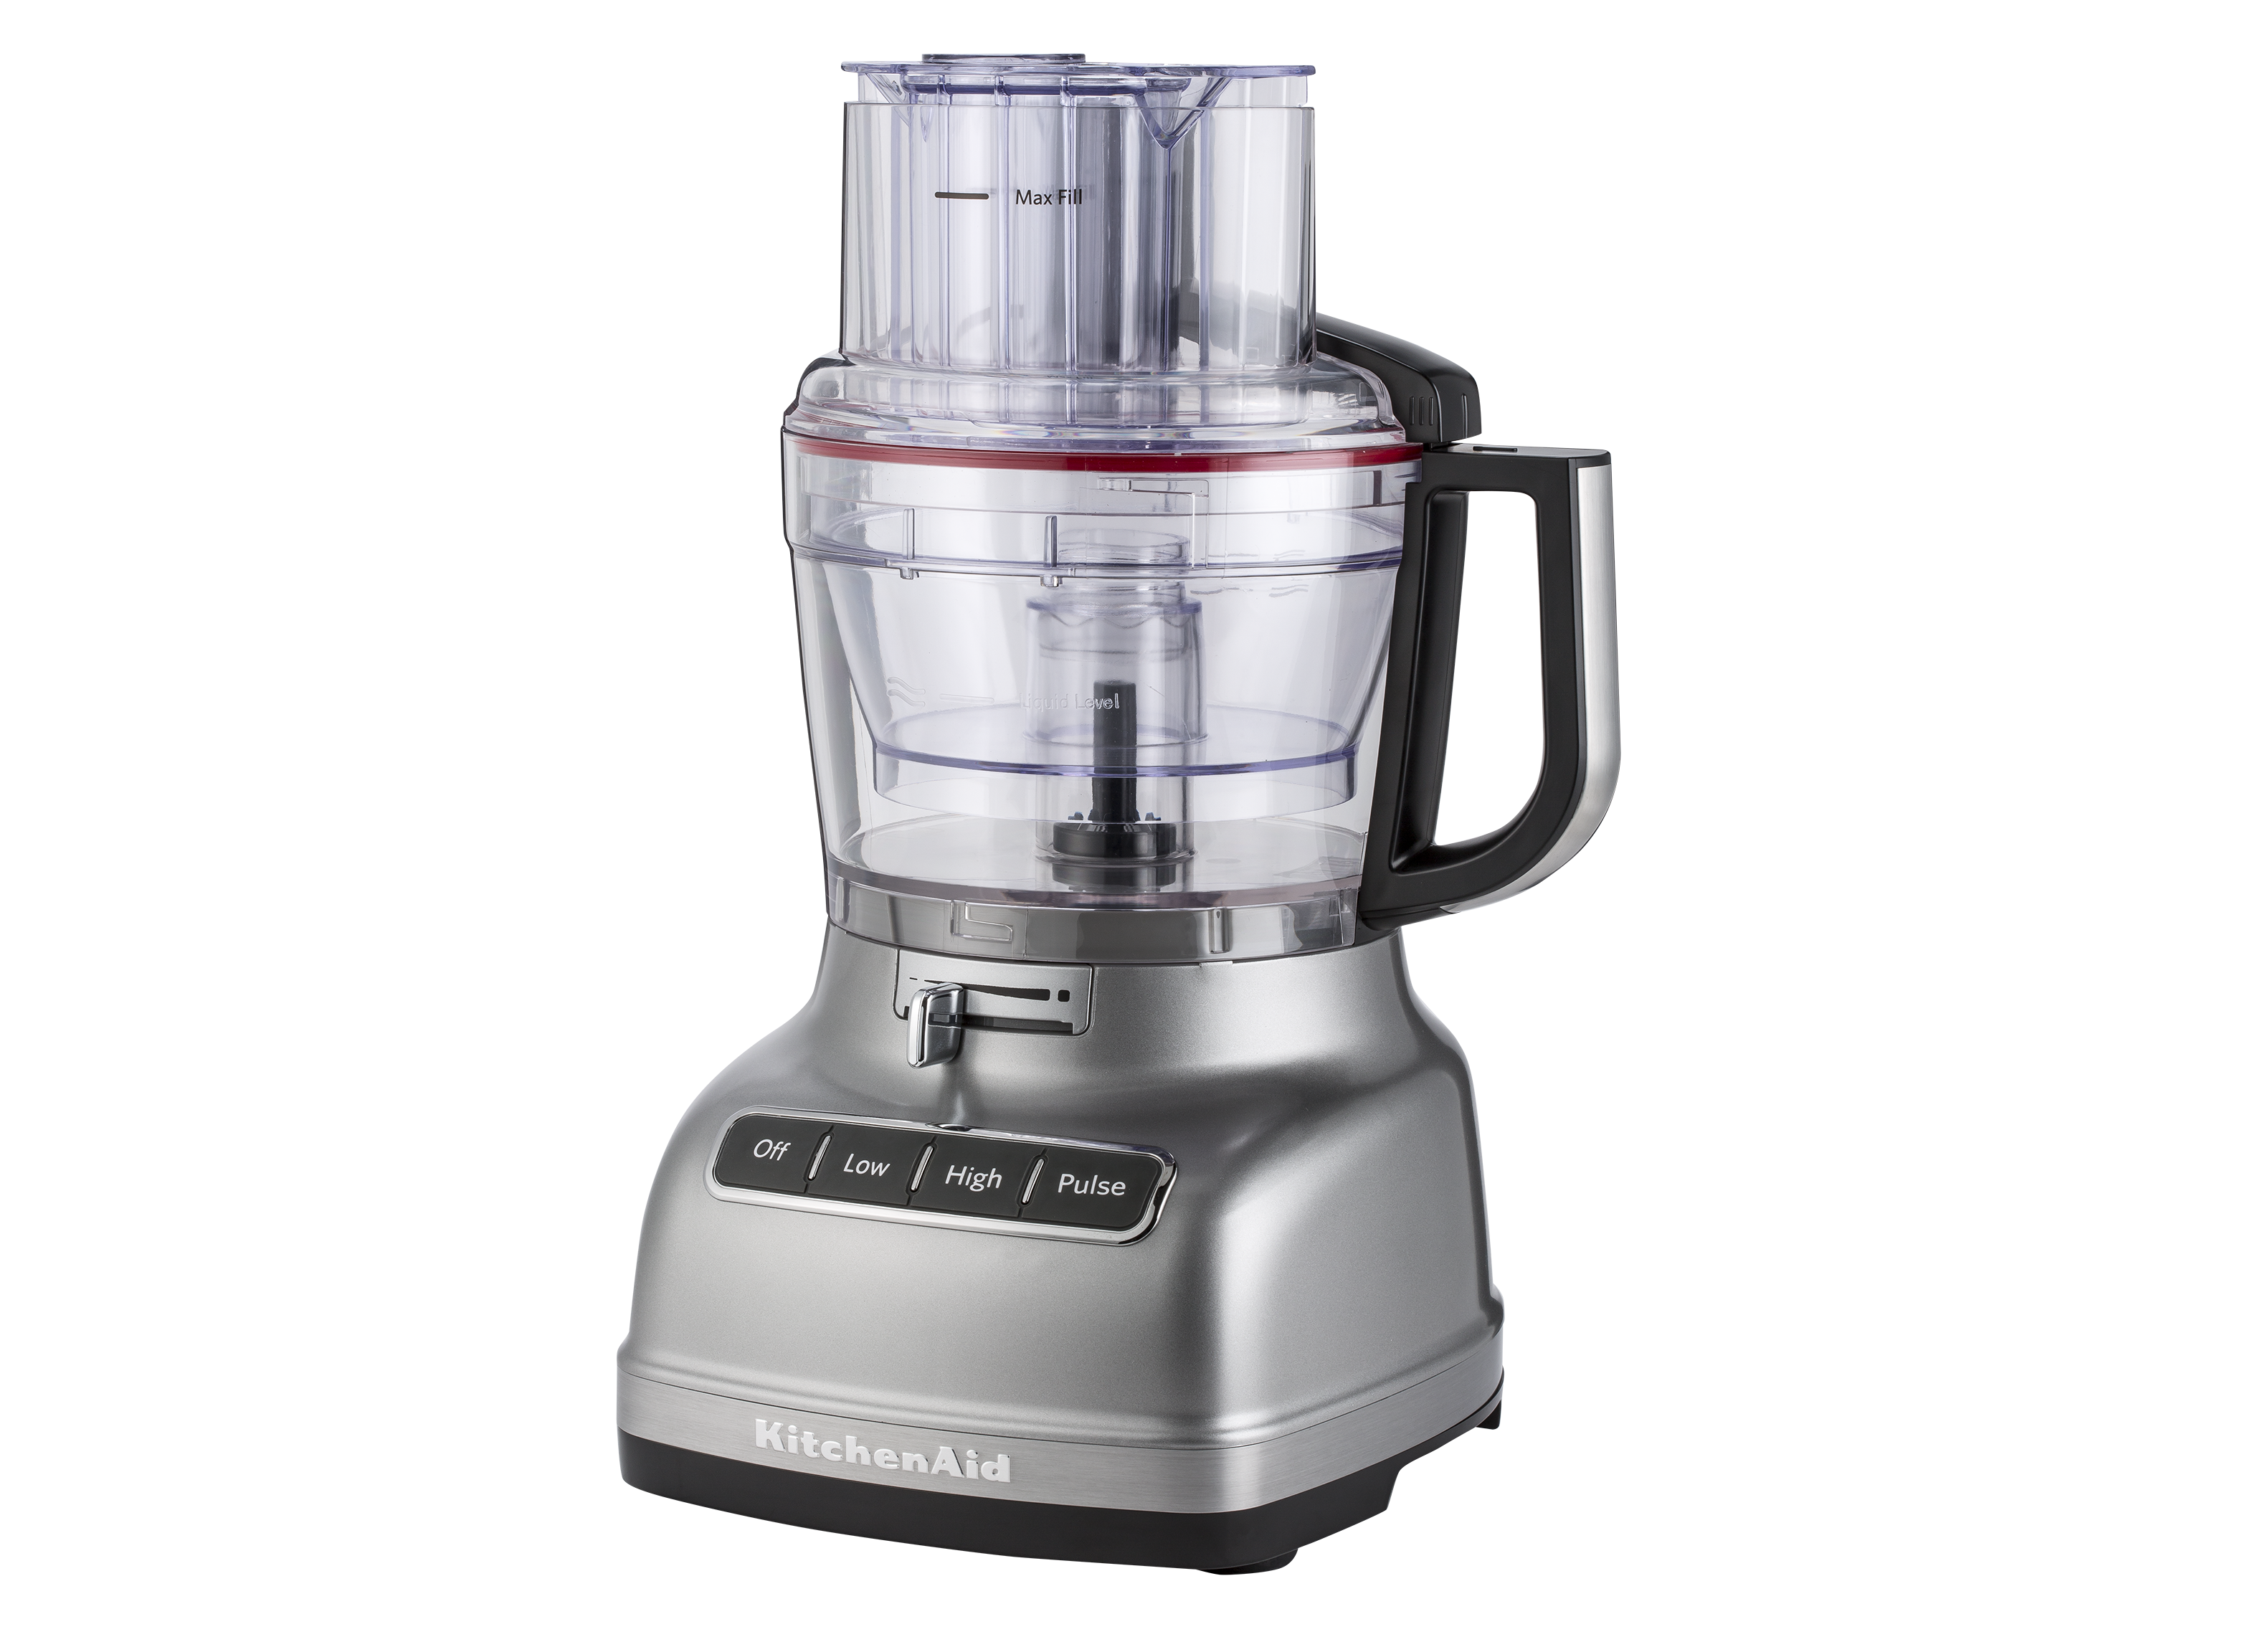 https://crdms.images.consumerreports.org/prod/products/cr/models/387447-foodprocessors-kitchenaid-11cupwithexactslicekfp1133.png